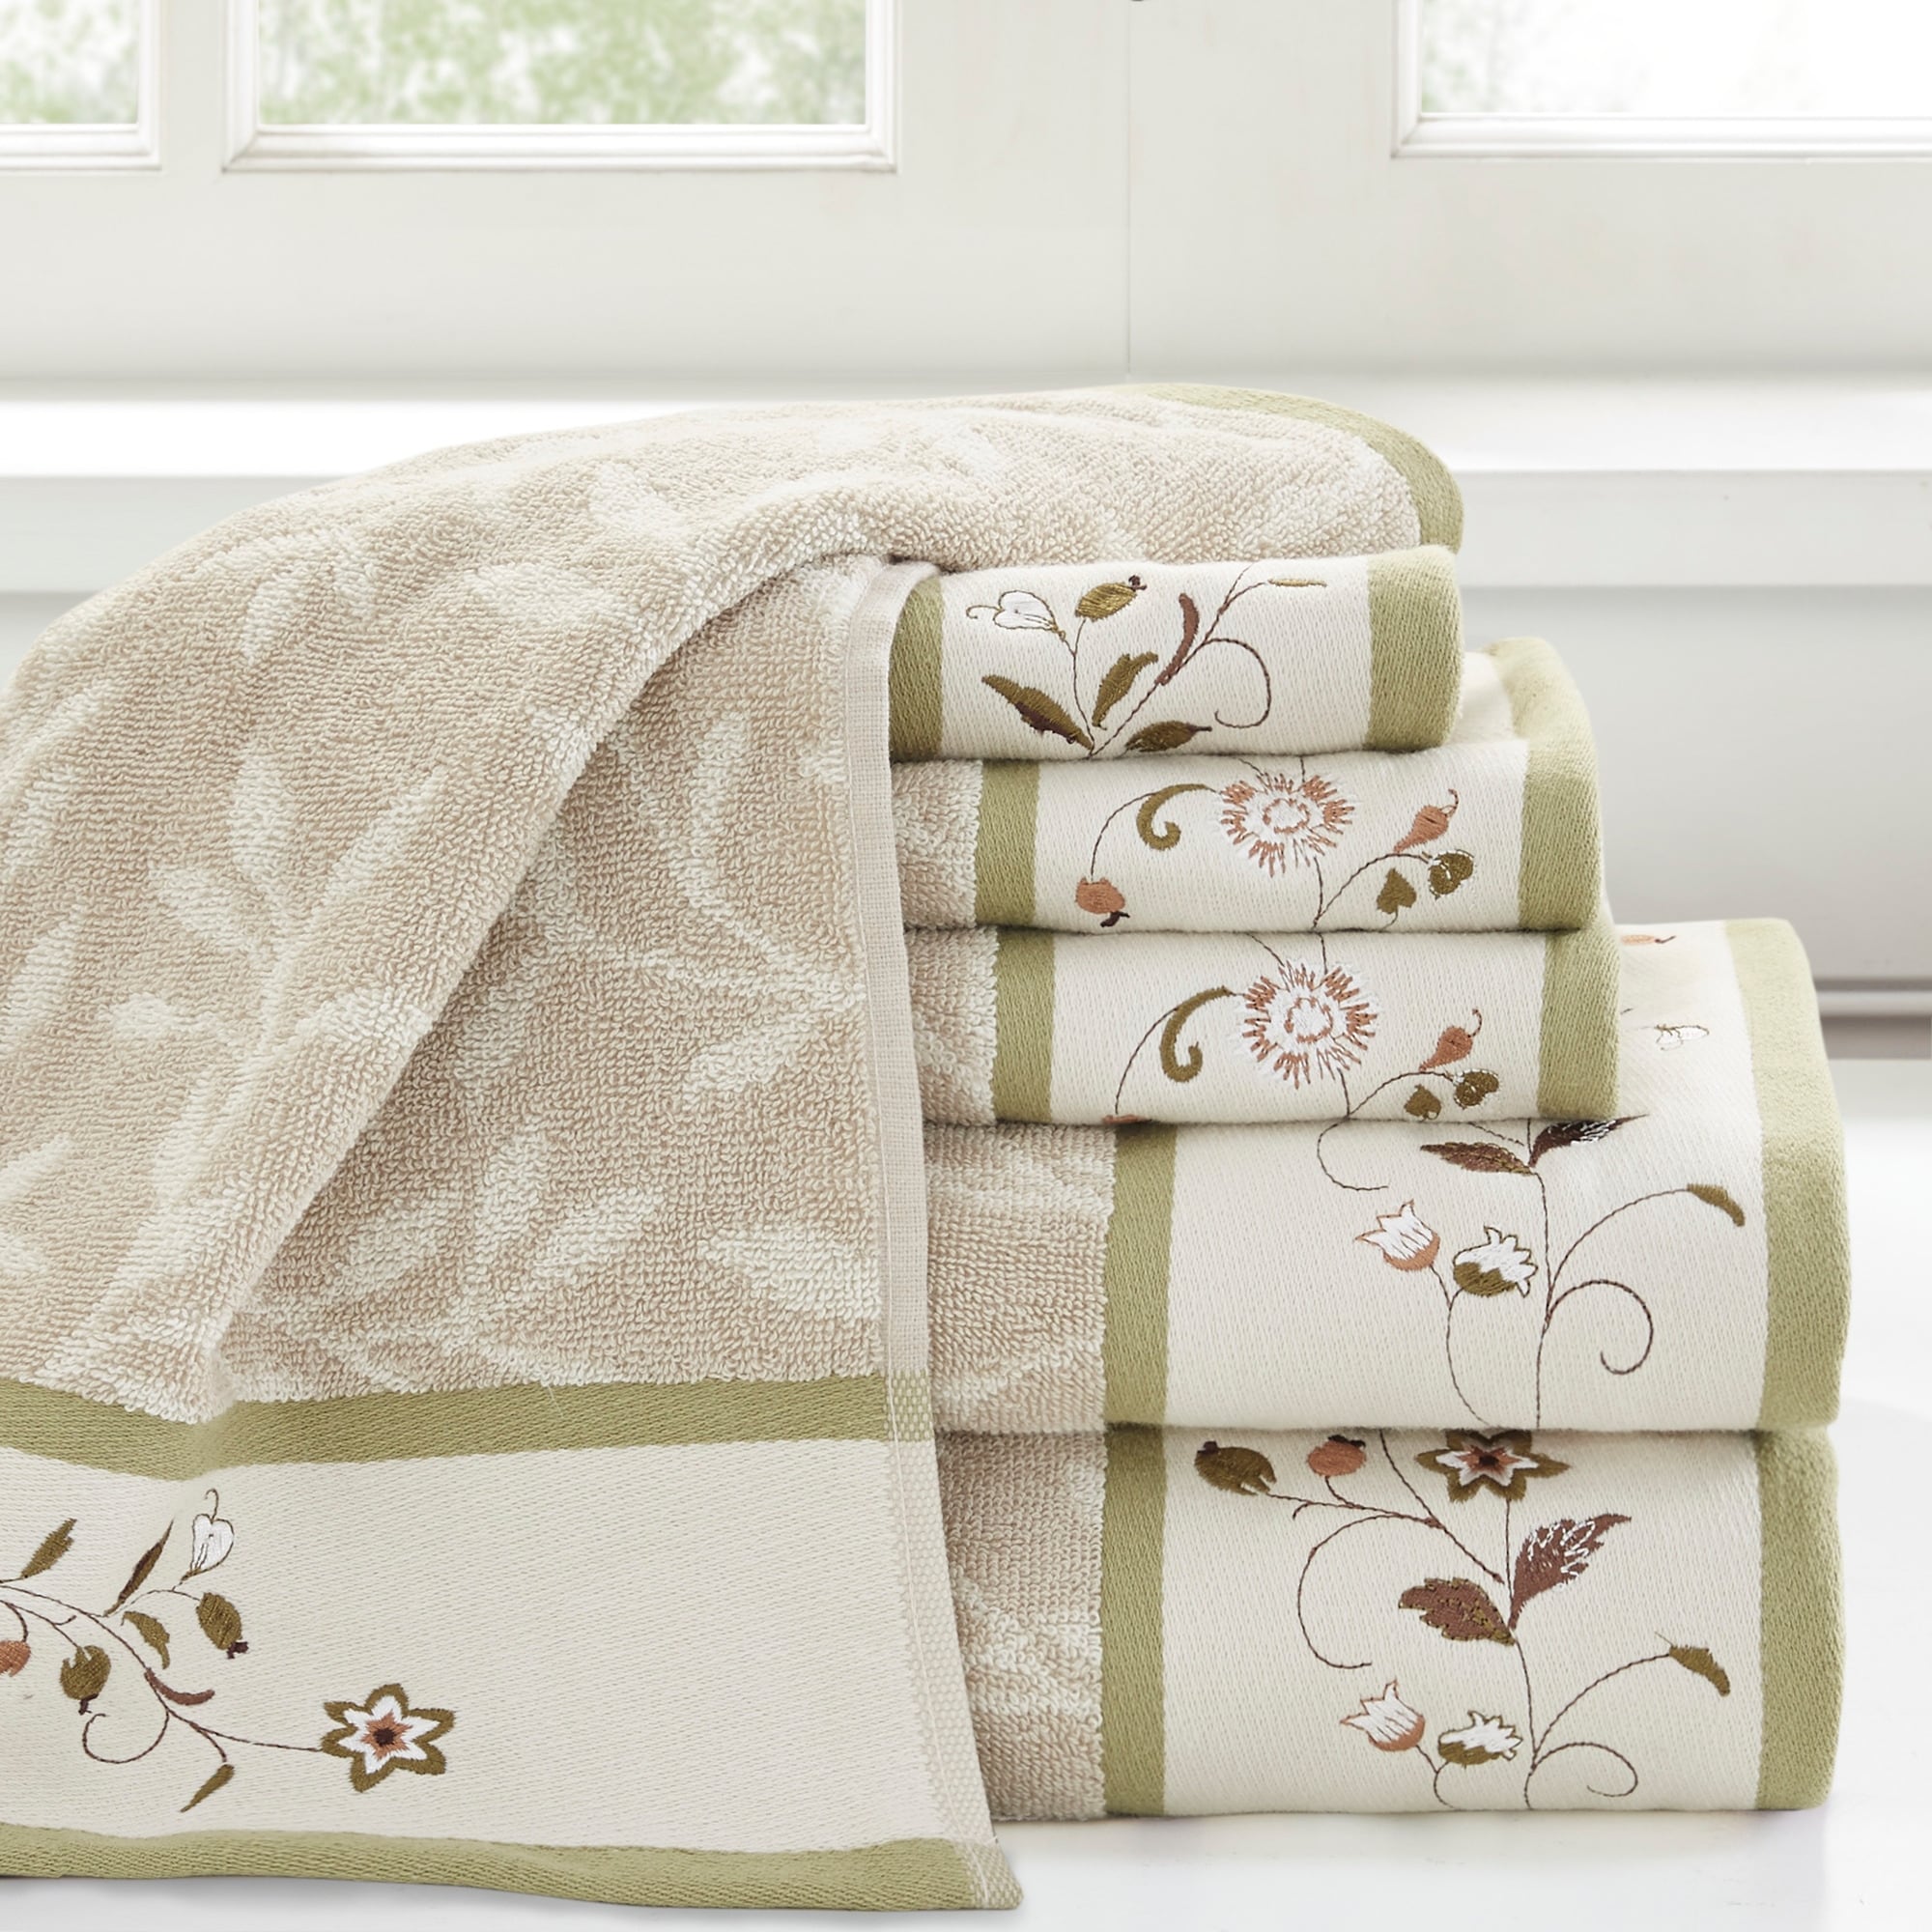 https://ak1.ostkcdn.com/images/products/is/images/direct/0bfe6f768f6fc9275baeaba803bdd54c9f3f9ffb/Madison-Park-Belle-Embroidered-Cotton-Jacquard-6-piece-Towel-Set.jpg